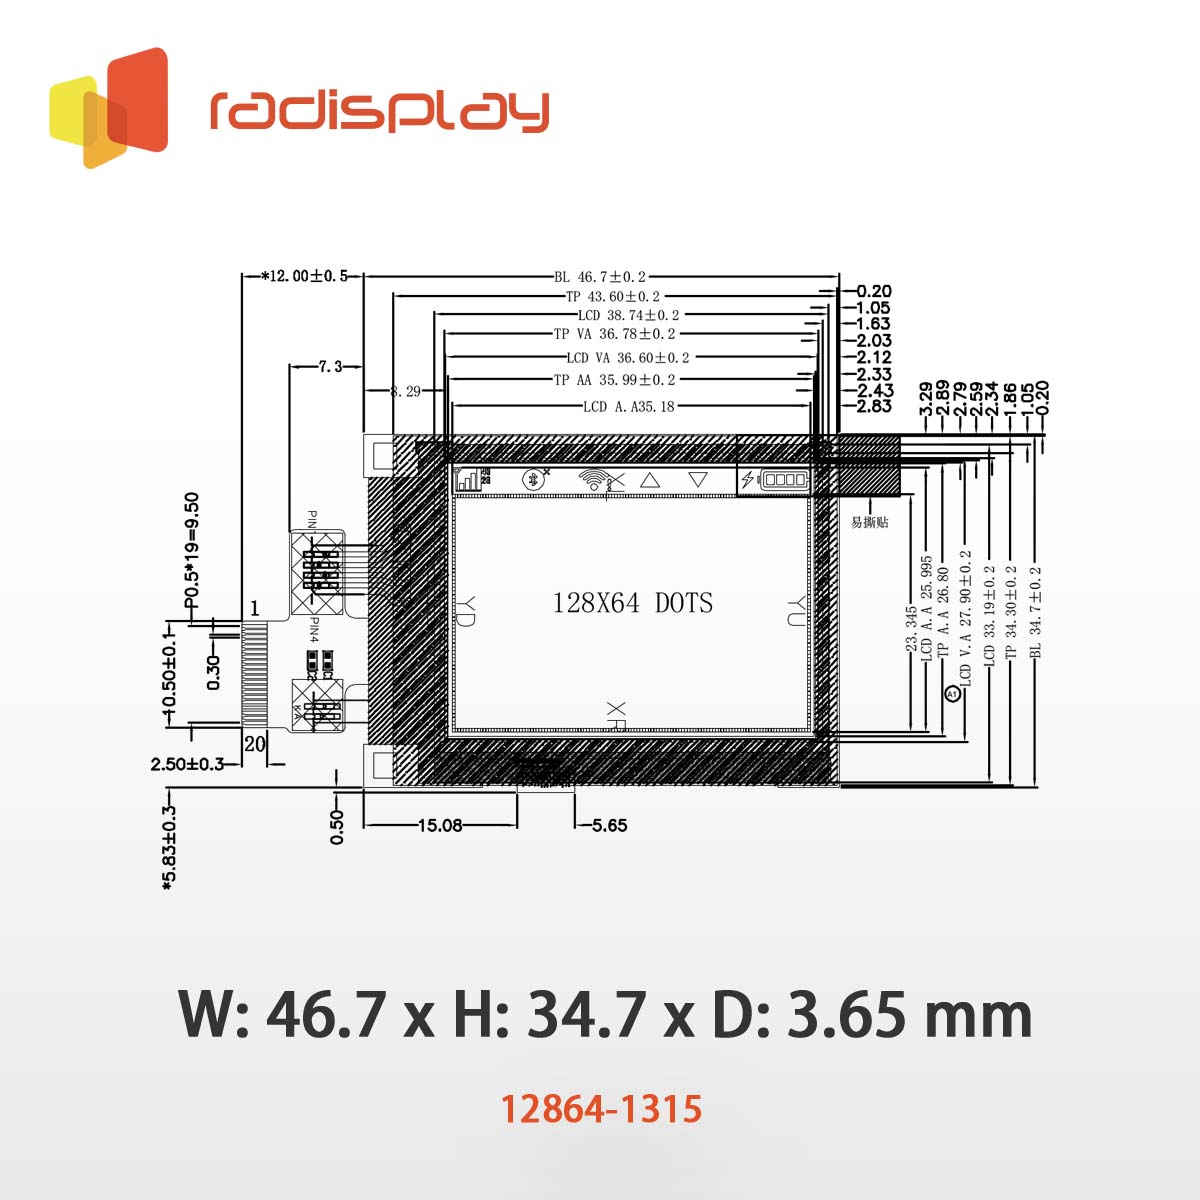 128x64 Graphic LCD (Chip on Glass with Touch Panel) (RC12864-1315)